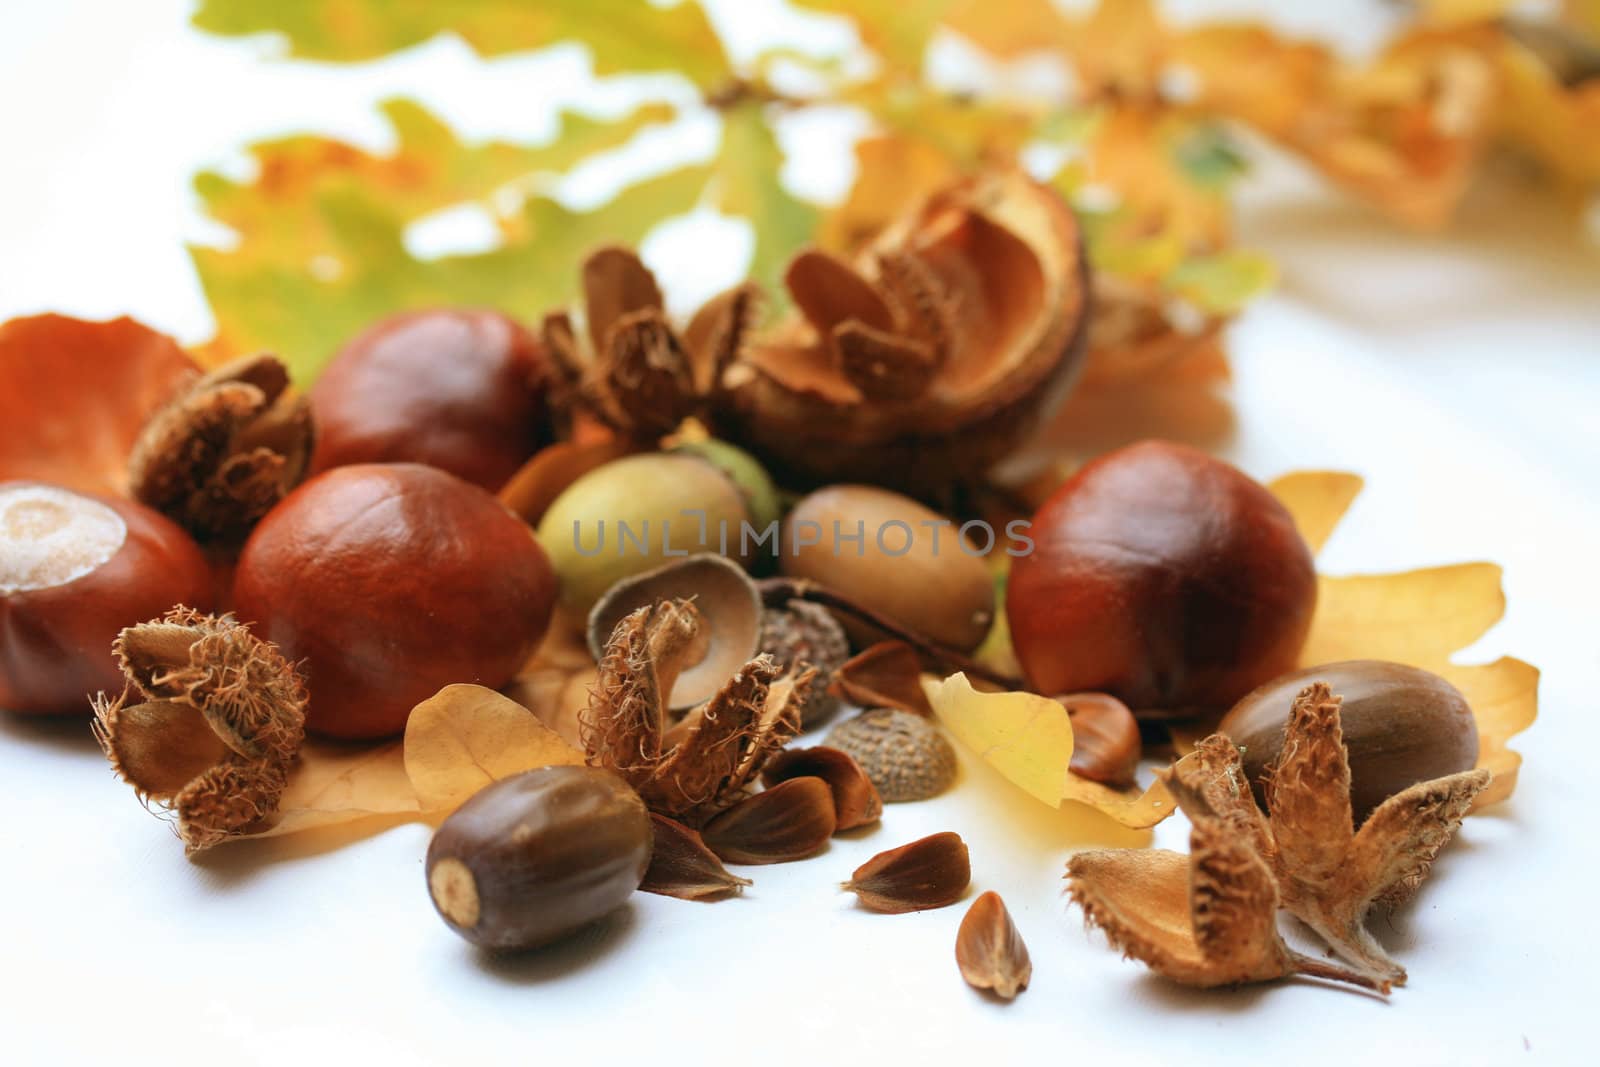 Chestnuts, acorns and european beech with oak leaves in the back